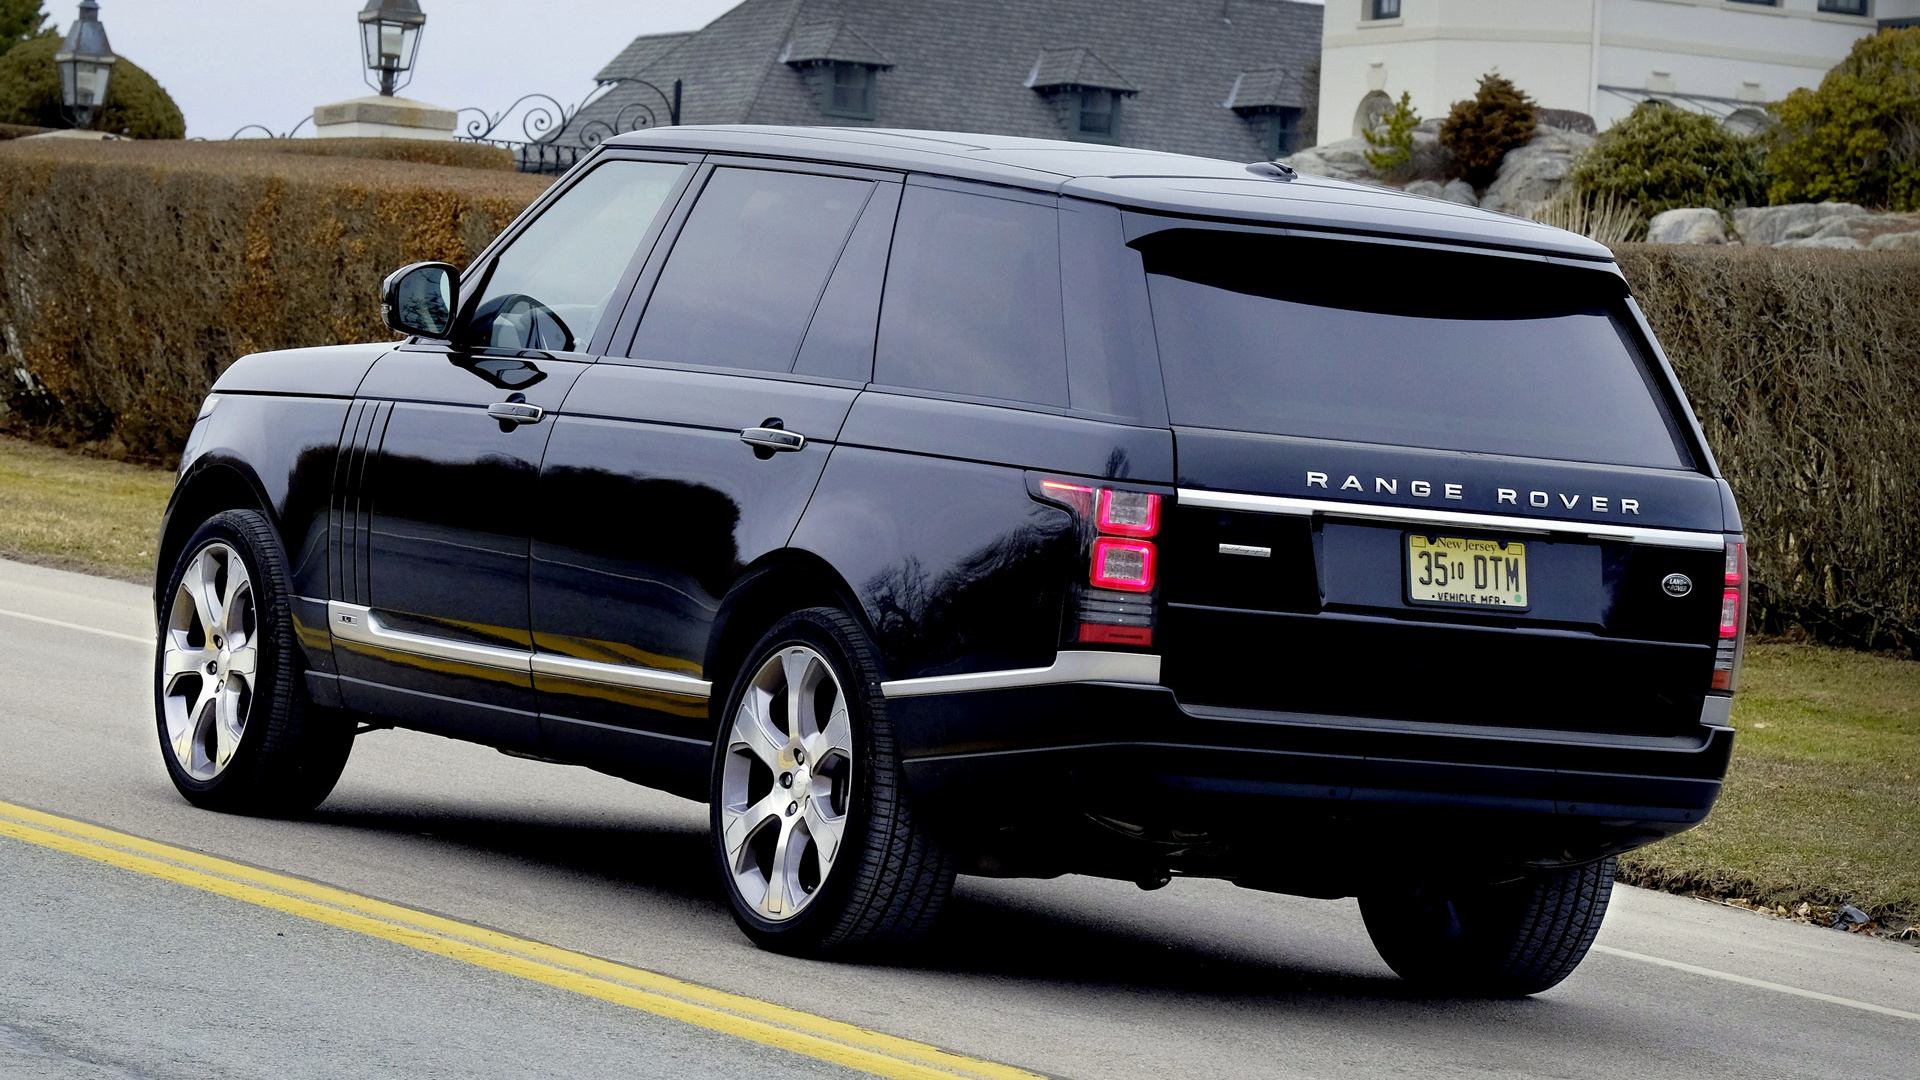 2014 Range Rover Autobiography [LWB] (US) - Wallpapers and HD Images ...